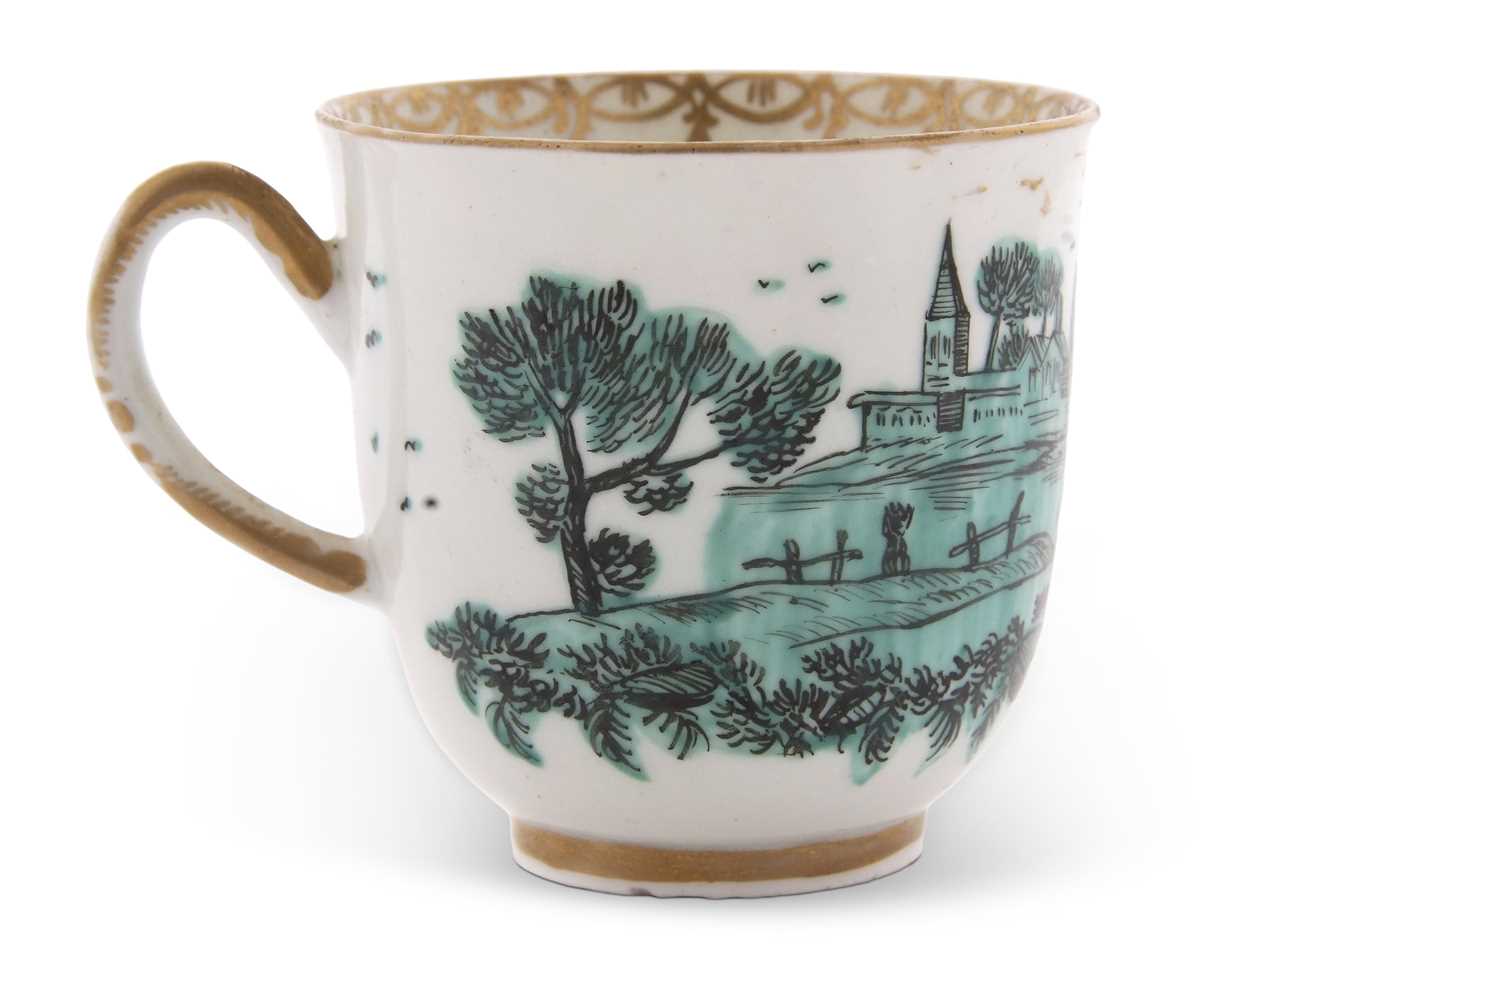 A Worcester porcelain cup decorated in green camaieu with a church and landscape scene, possibly